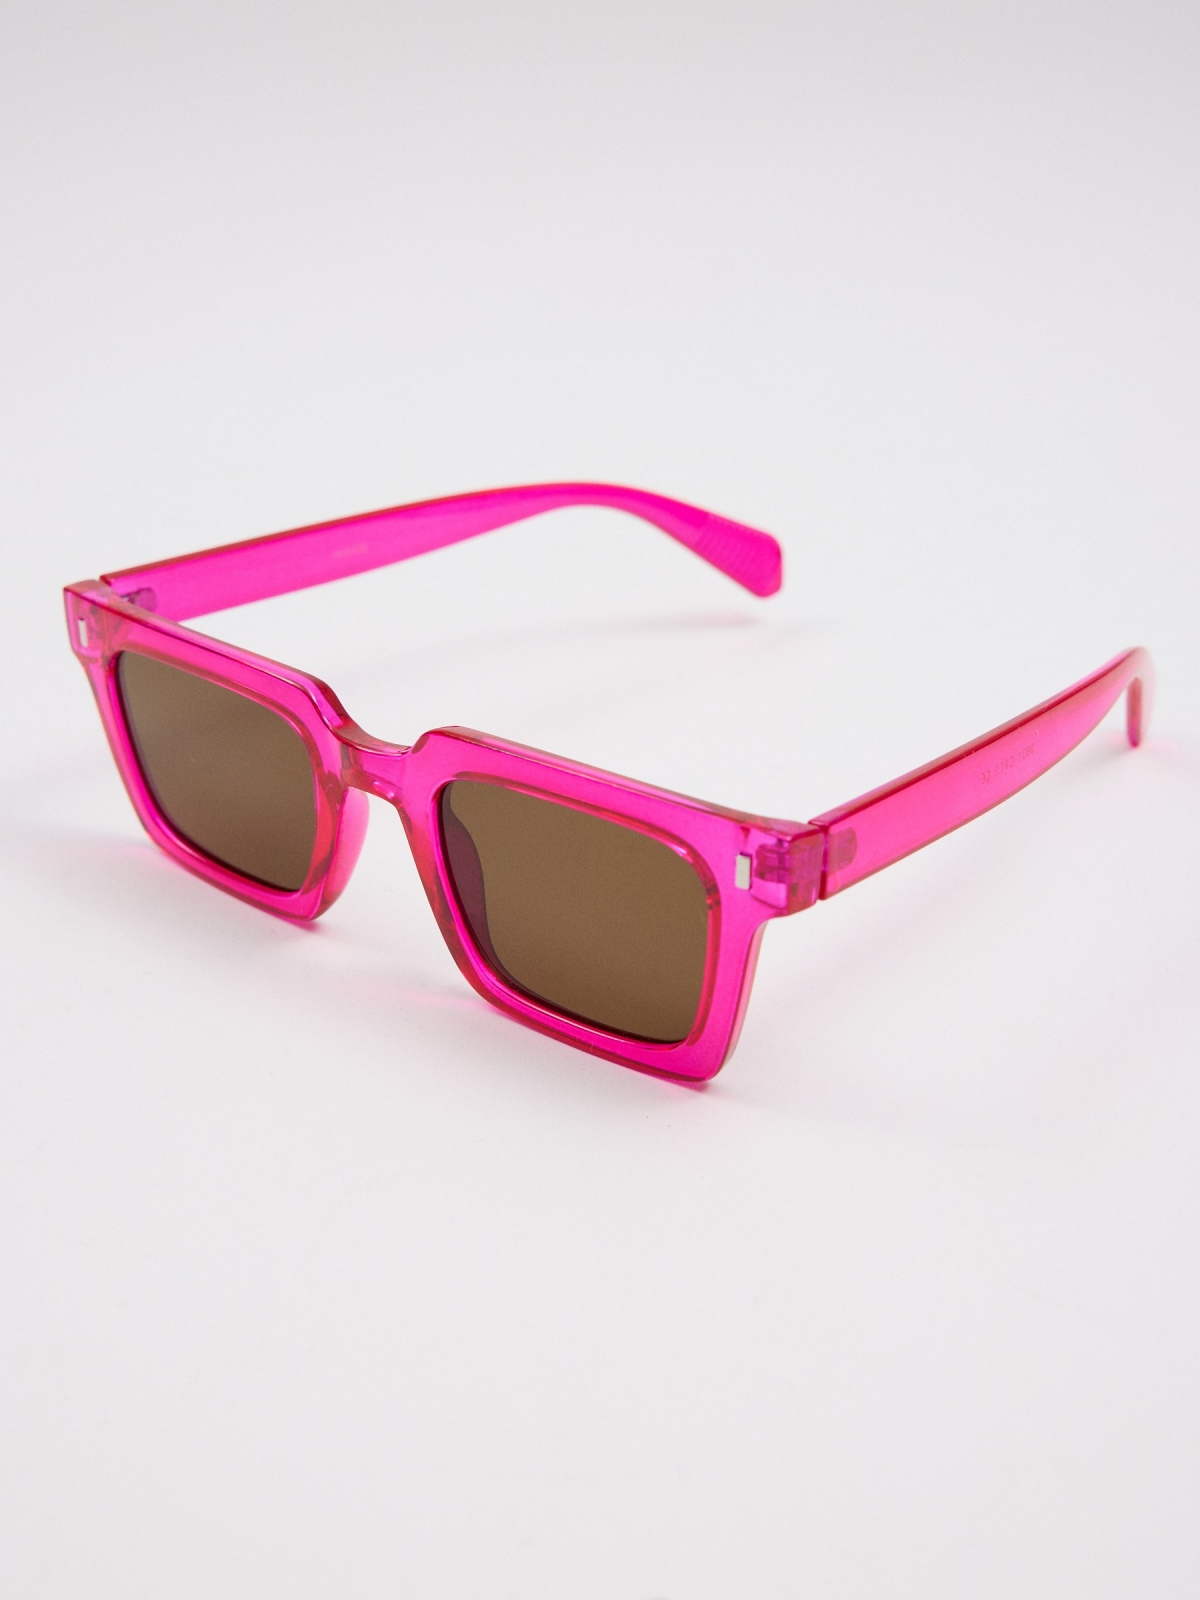 Square acetate sunglasses pink detail view